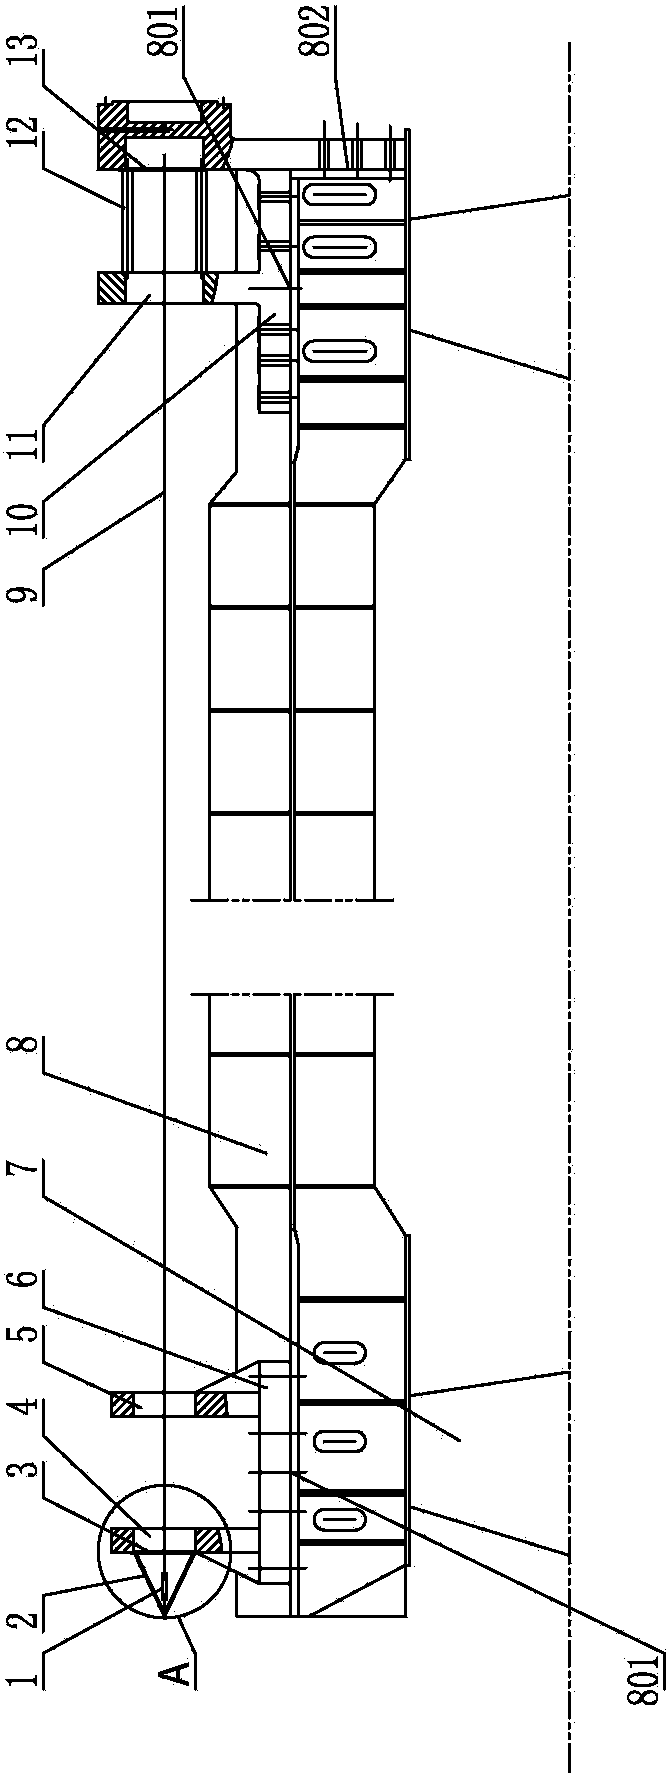 Coaxiality adjusting method for heel post of triangular gate